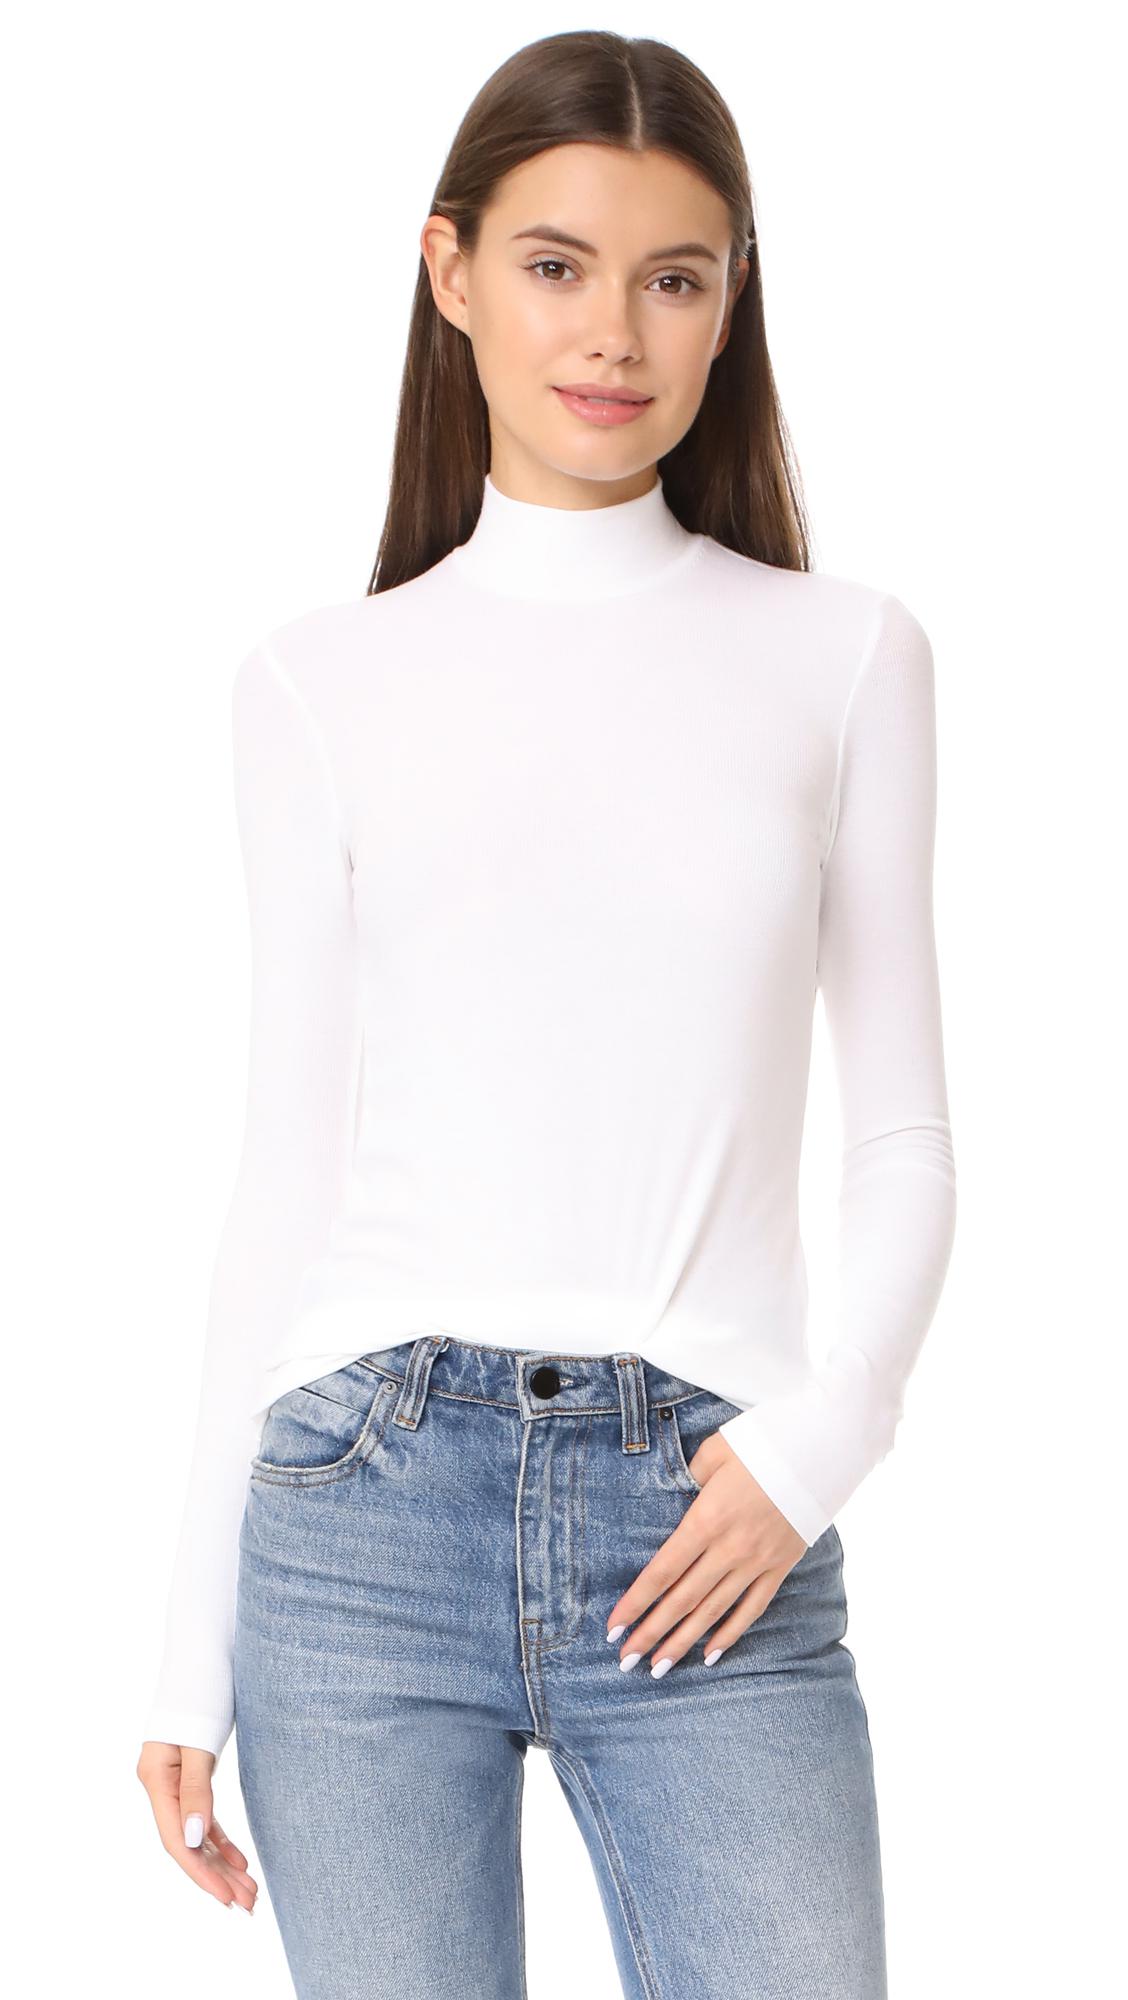 Lyst - Atm Long Sleeve Mock Neck Top in White